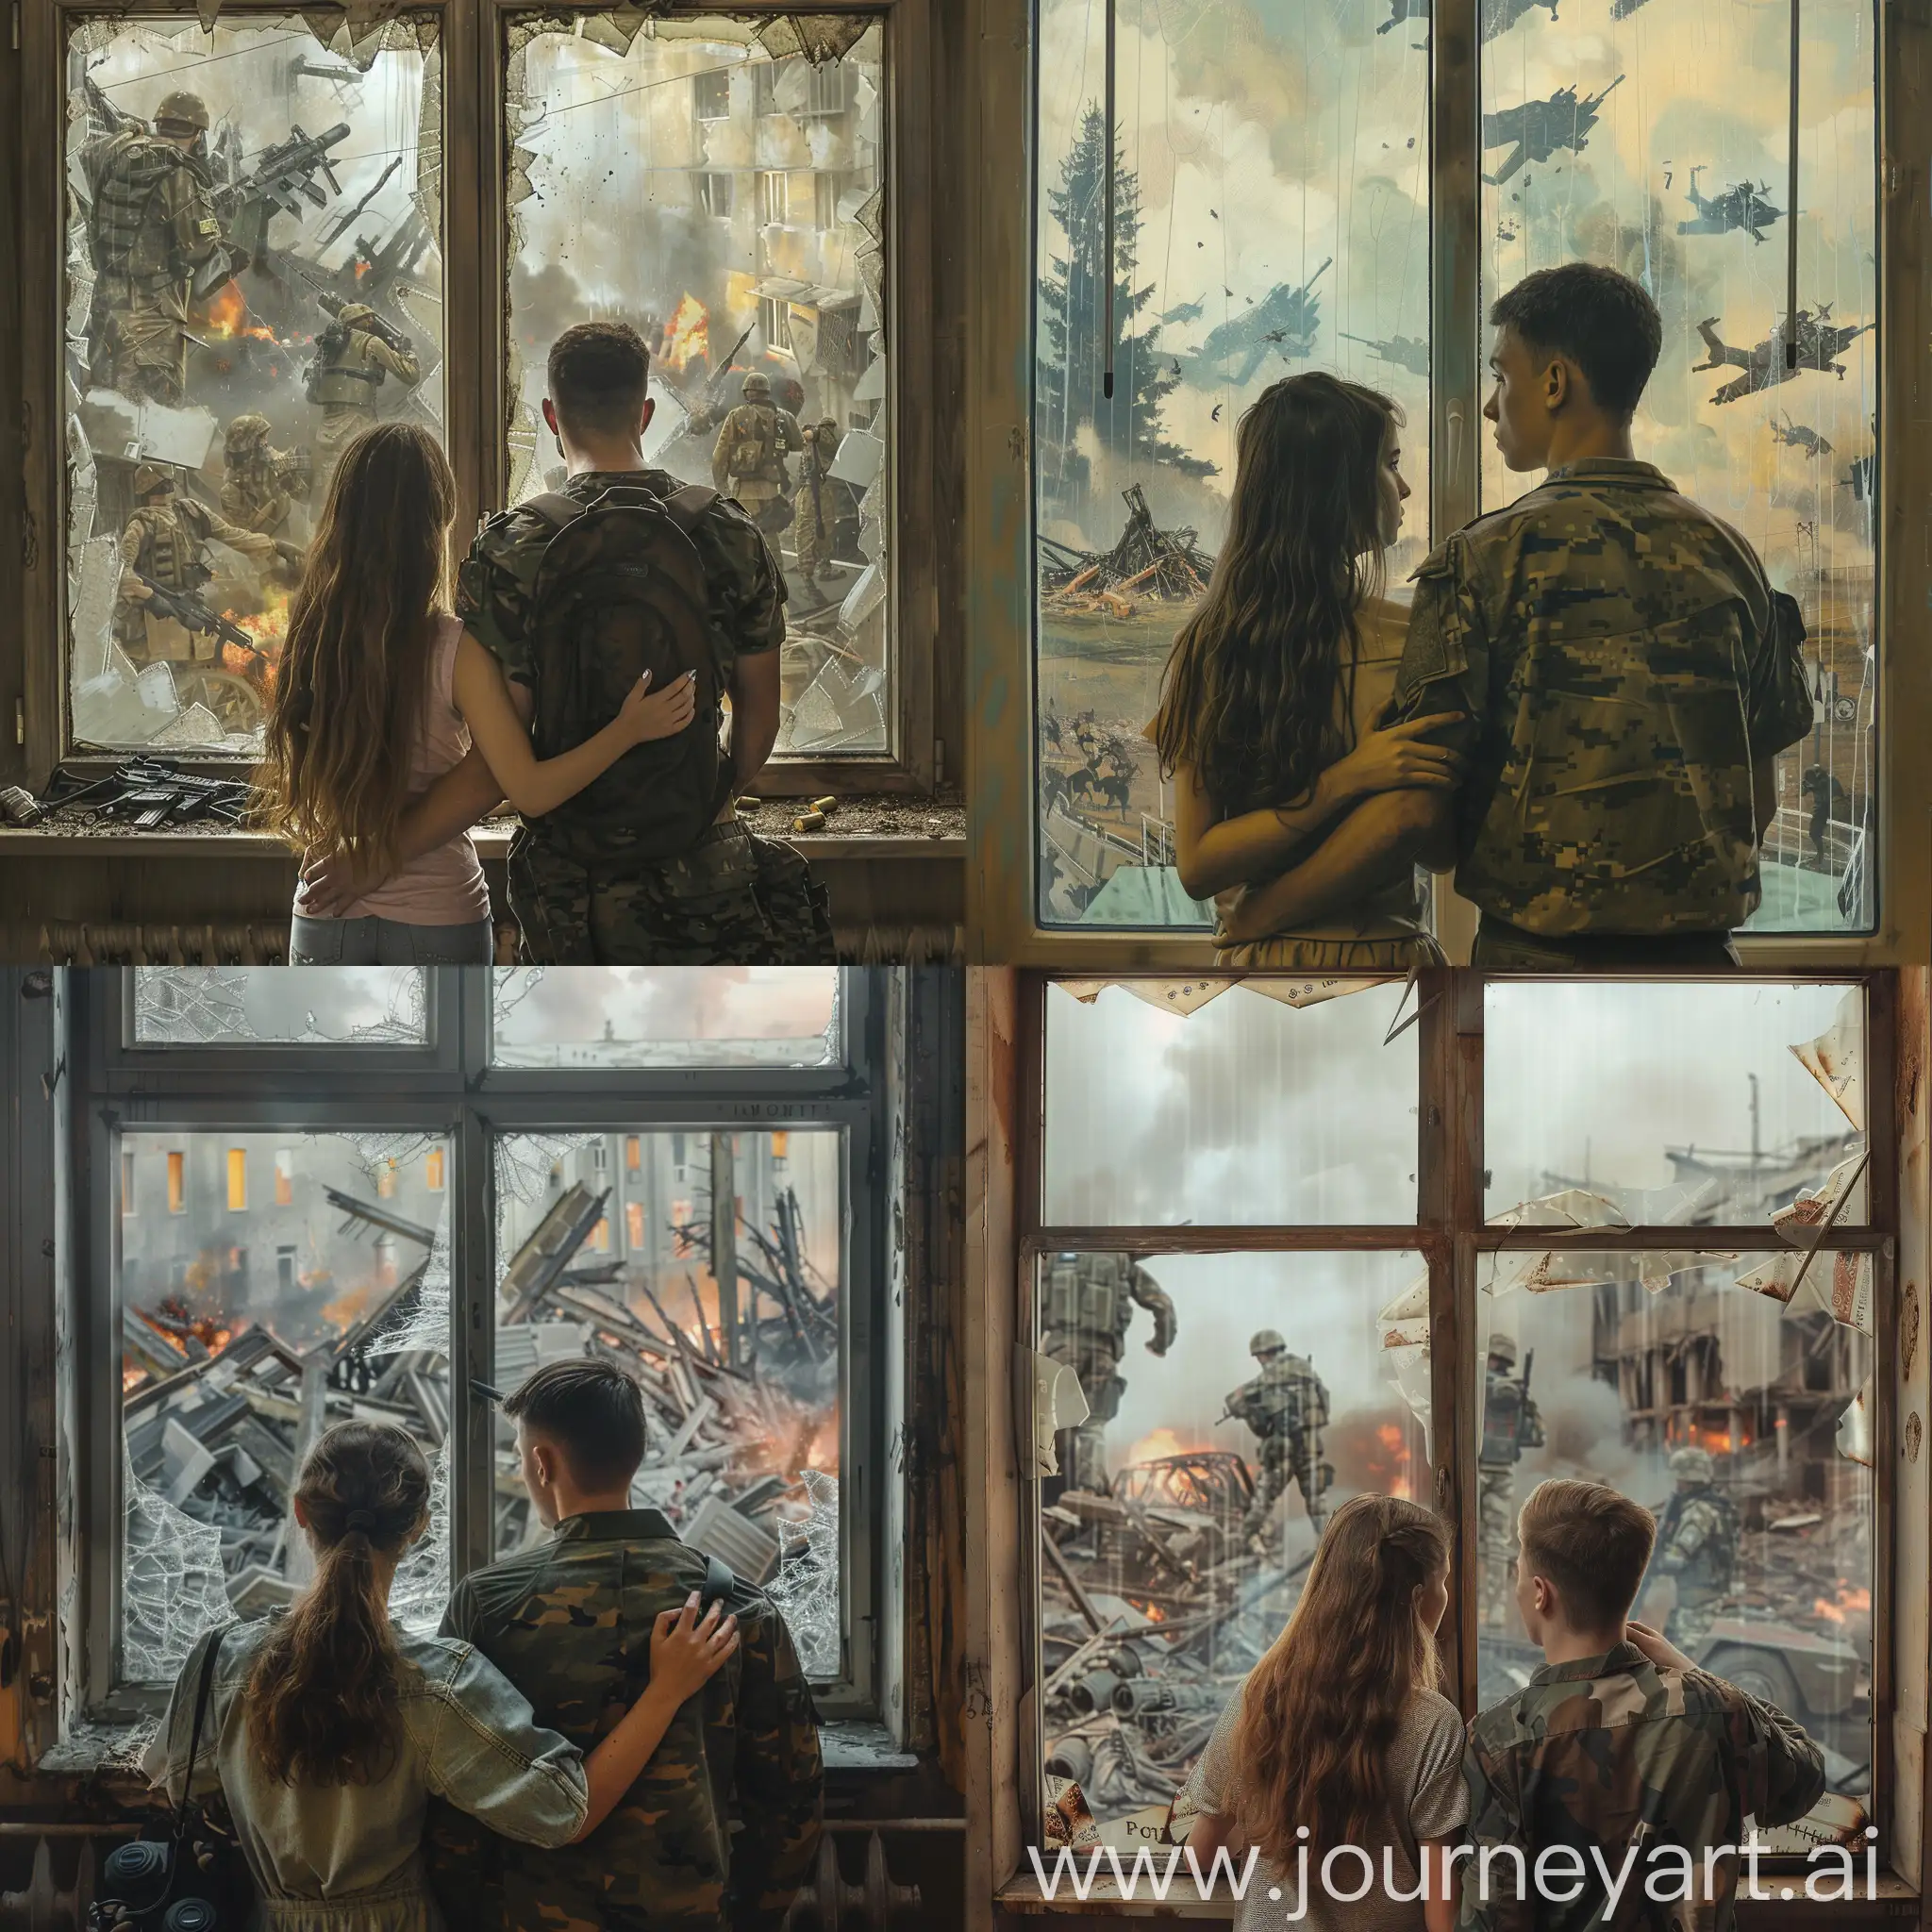 the picture is divided into two parts by a vertical strip. only a girl and a guy, both without military uniforms and clothes look at the window and support each other. the window is common in the middle of the picture. in the window are military actions, destruction